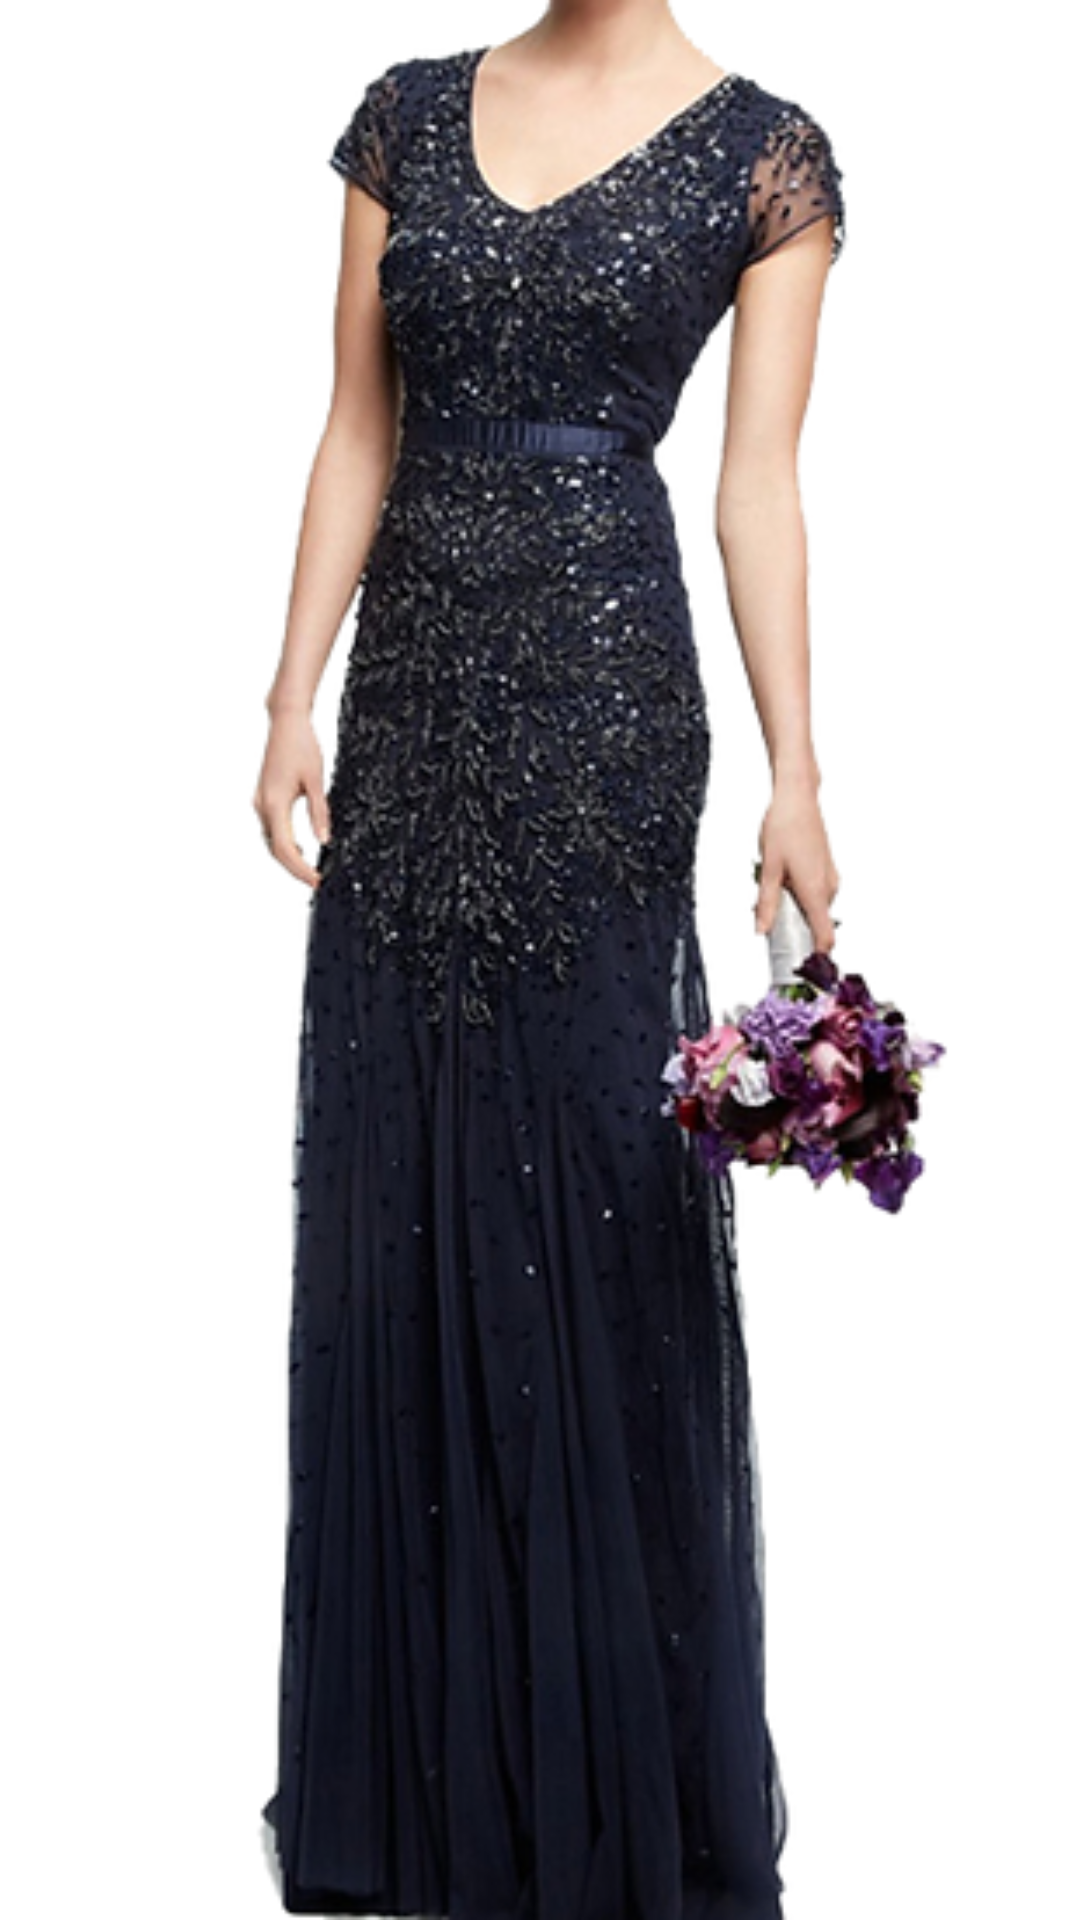 Adrianna Papell Gladys Cap Sleeved Beaded Gown in Navy